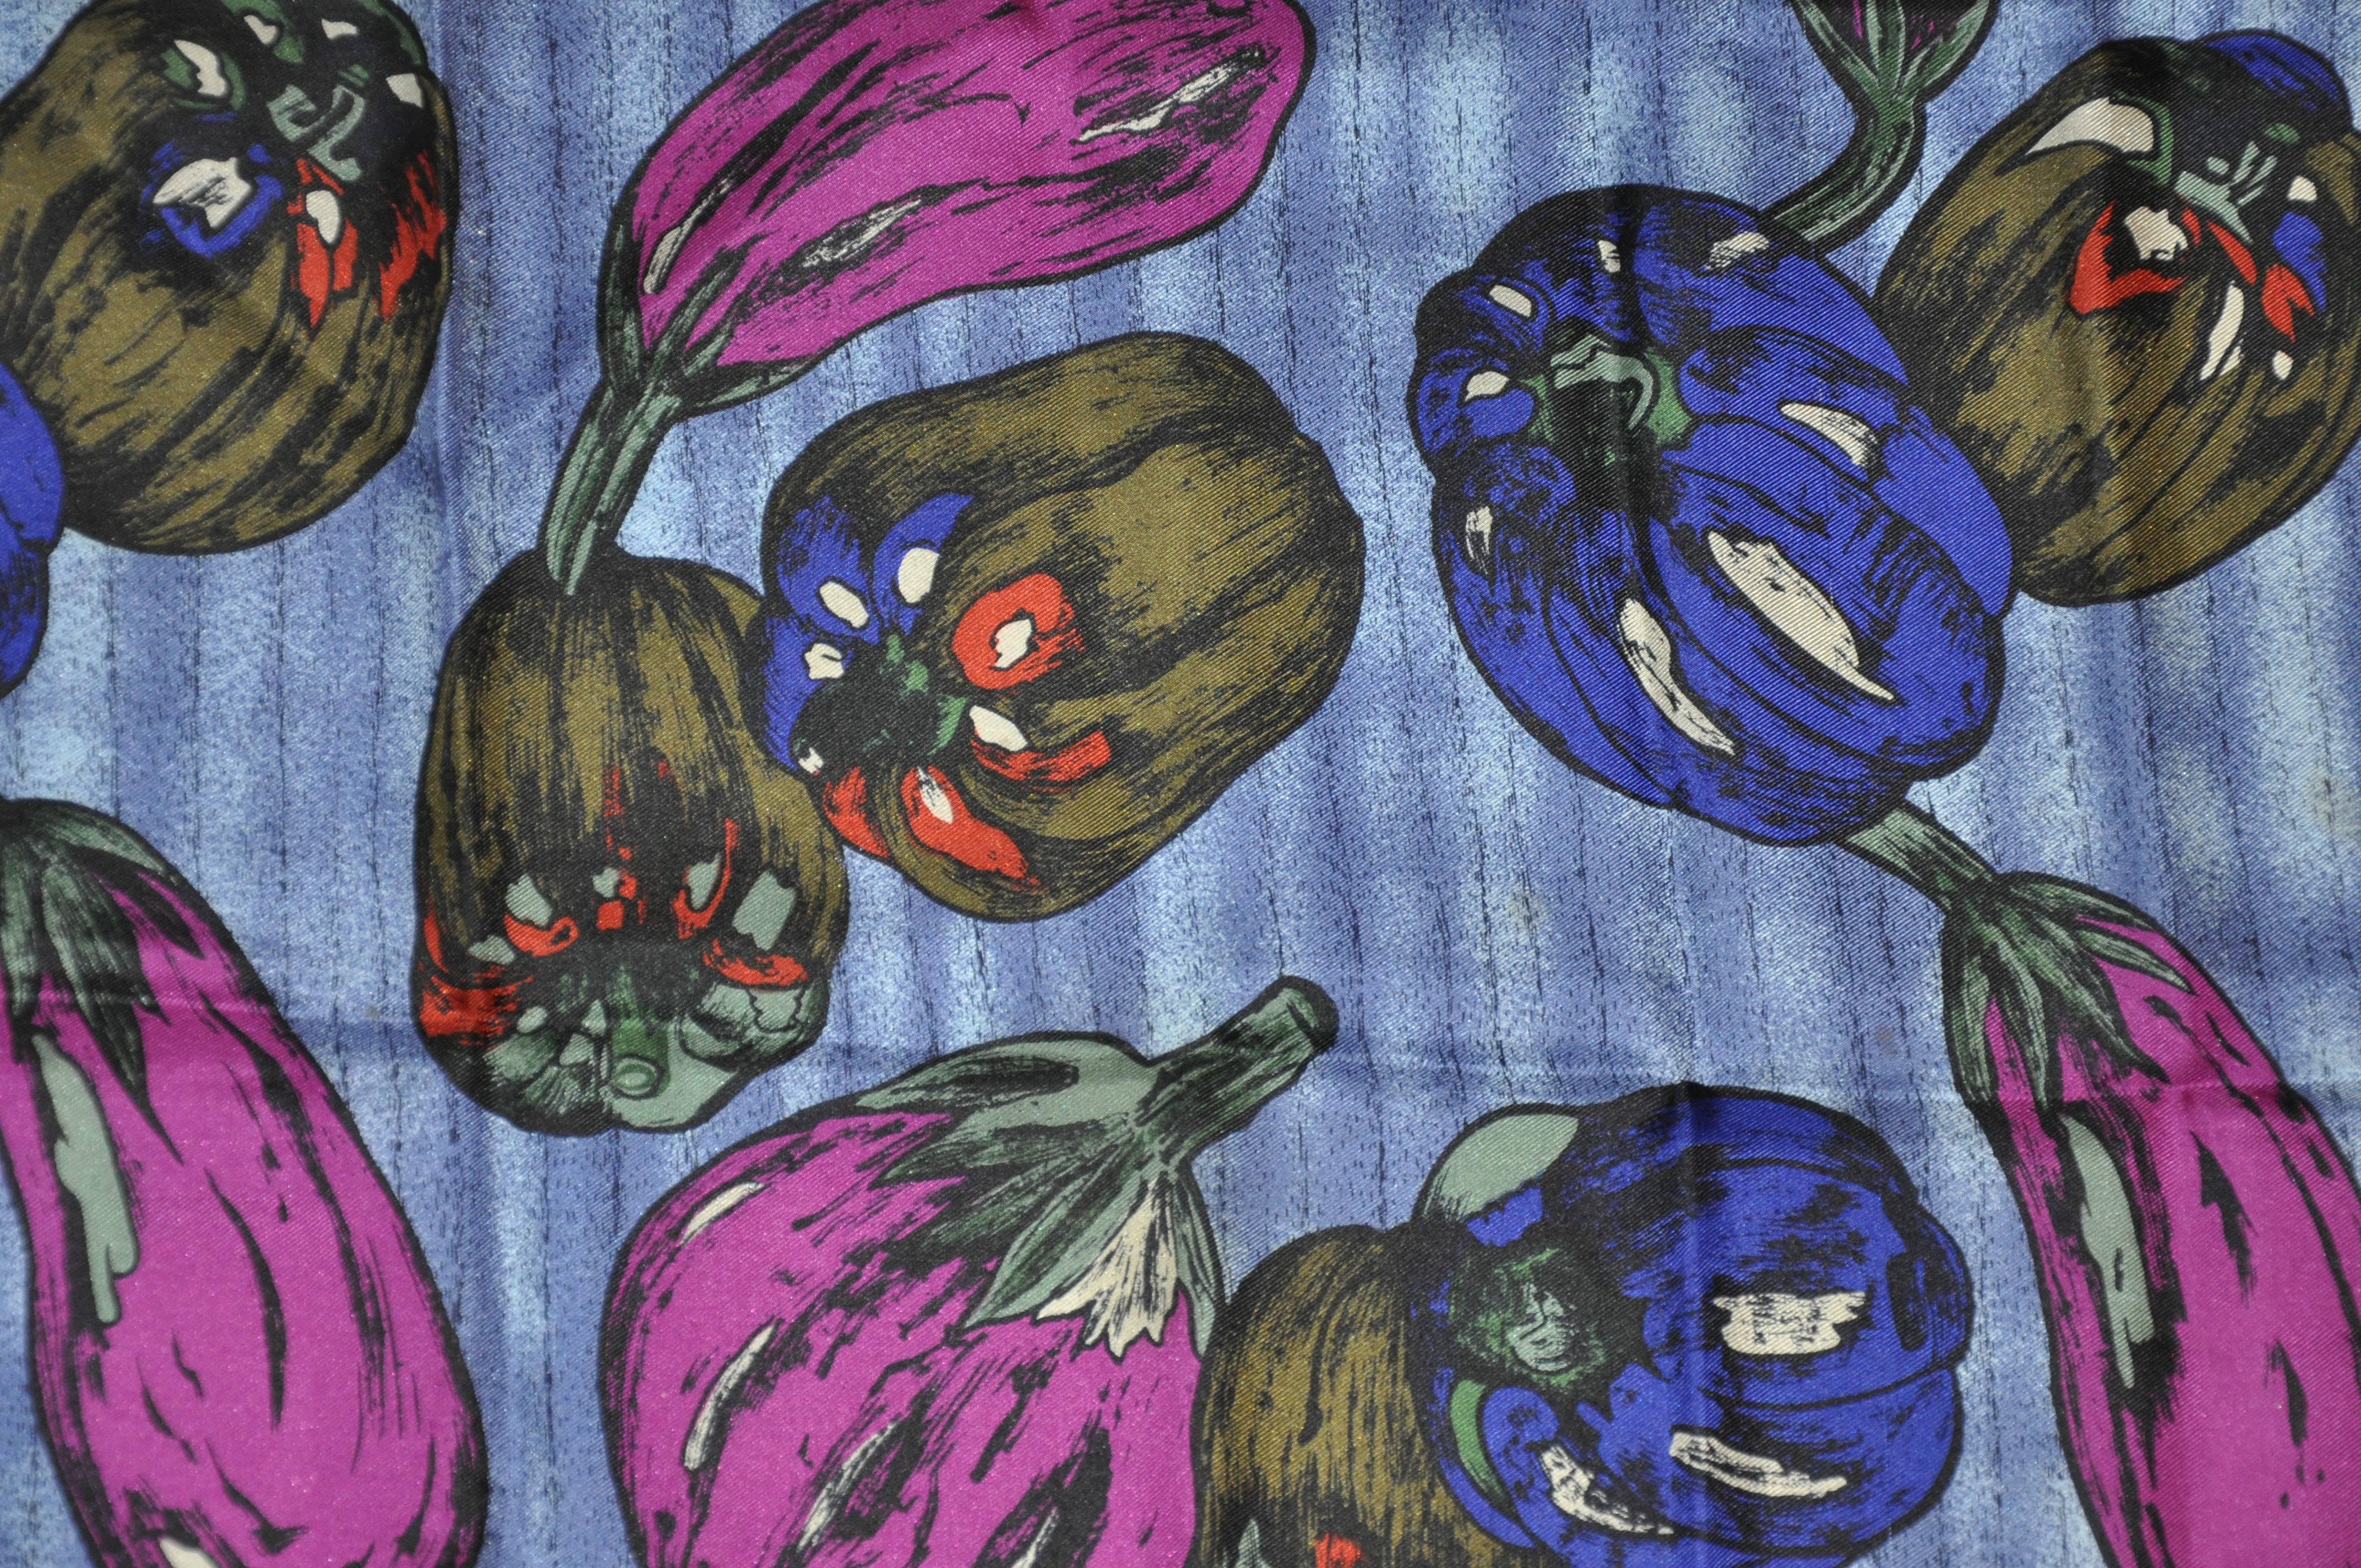 Perry Ellis wonderful "Peppers & Eggplants" silk scarf measures 30" x 31", finished with hand-rolled edges. Made in Italy.